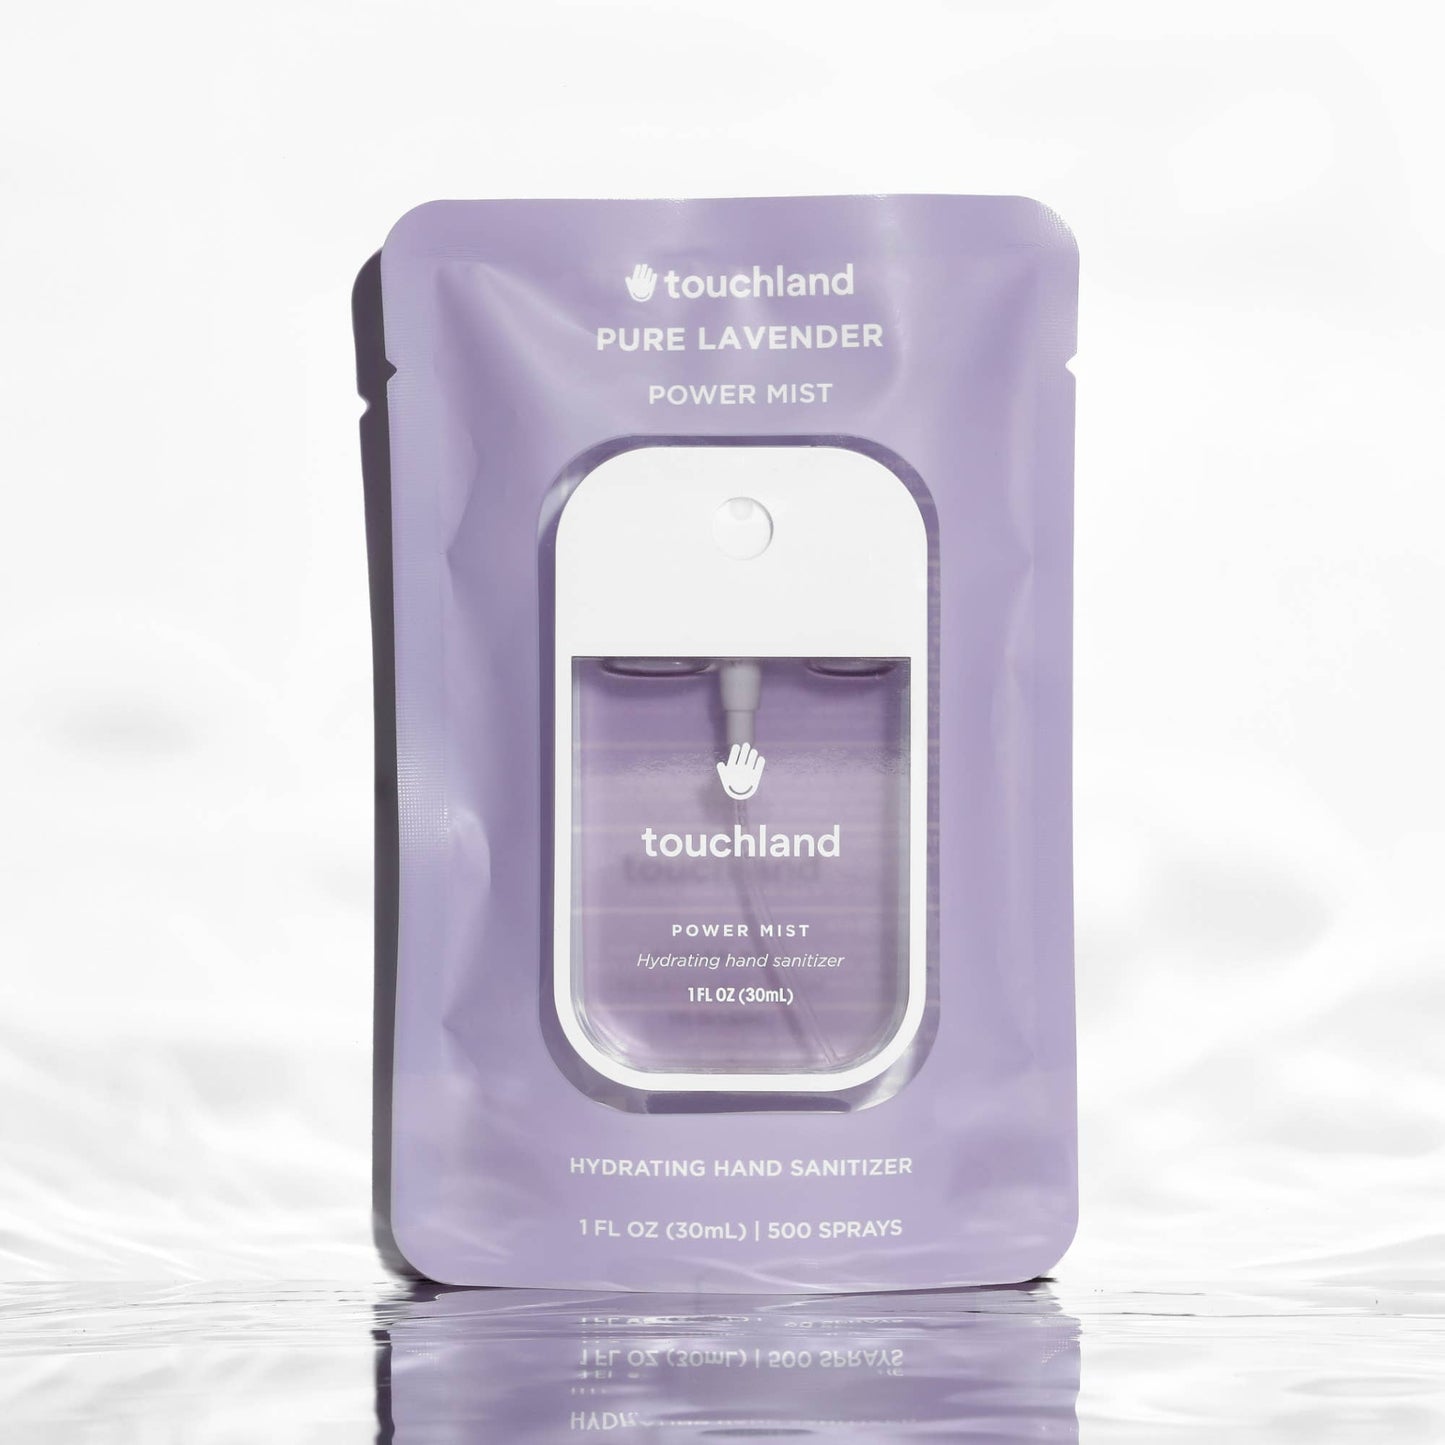 Power Mist Pure Lavender in a bag